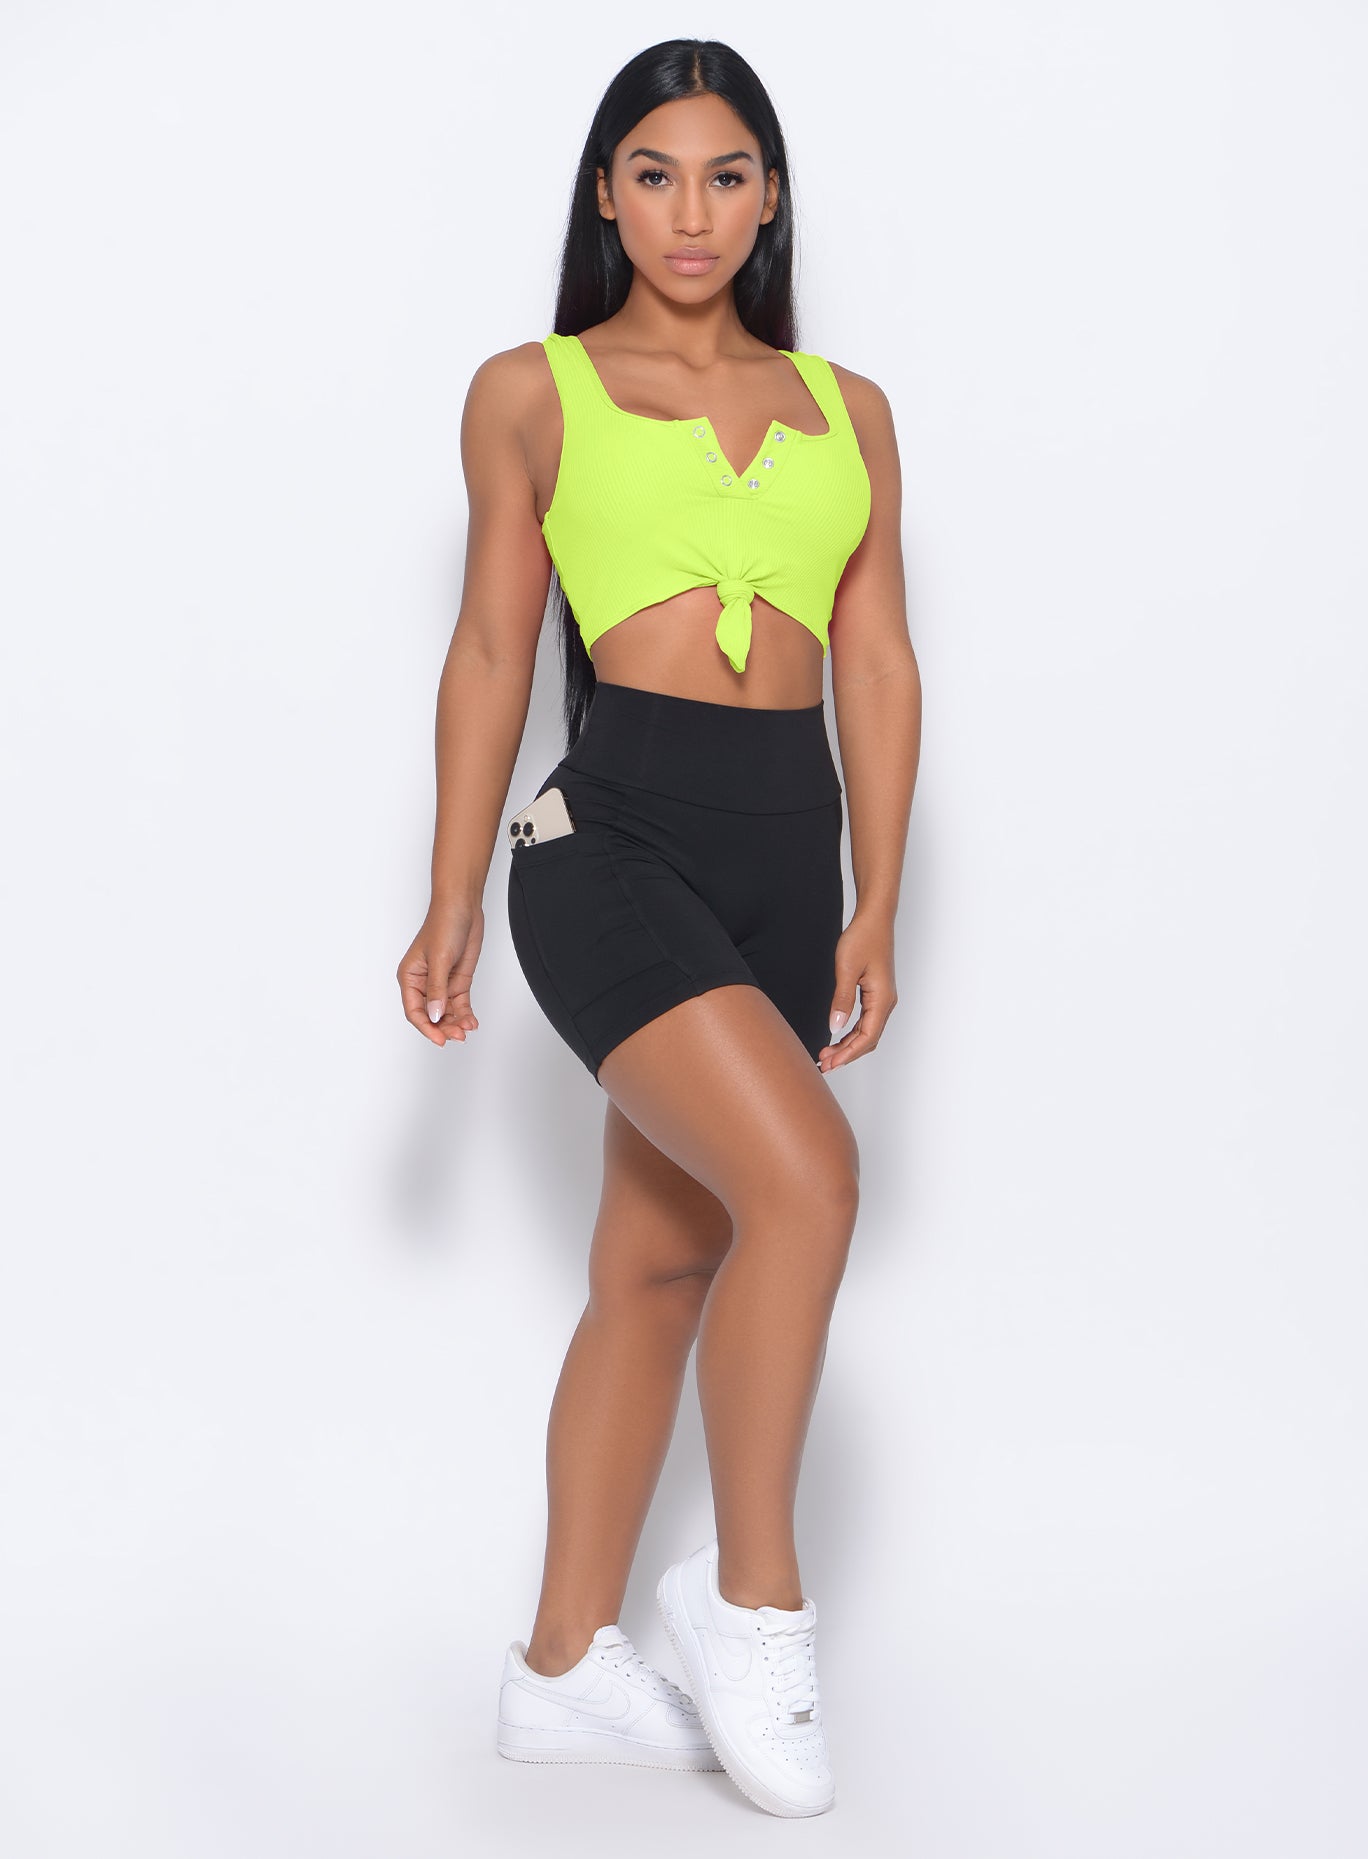 Front profile view of the model in our black pocket biker shorts and a neon yellow bra